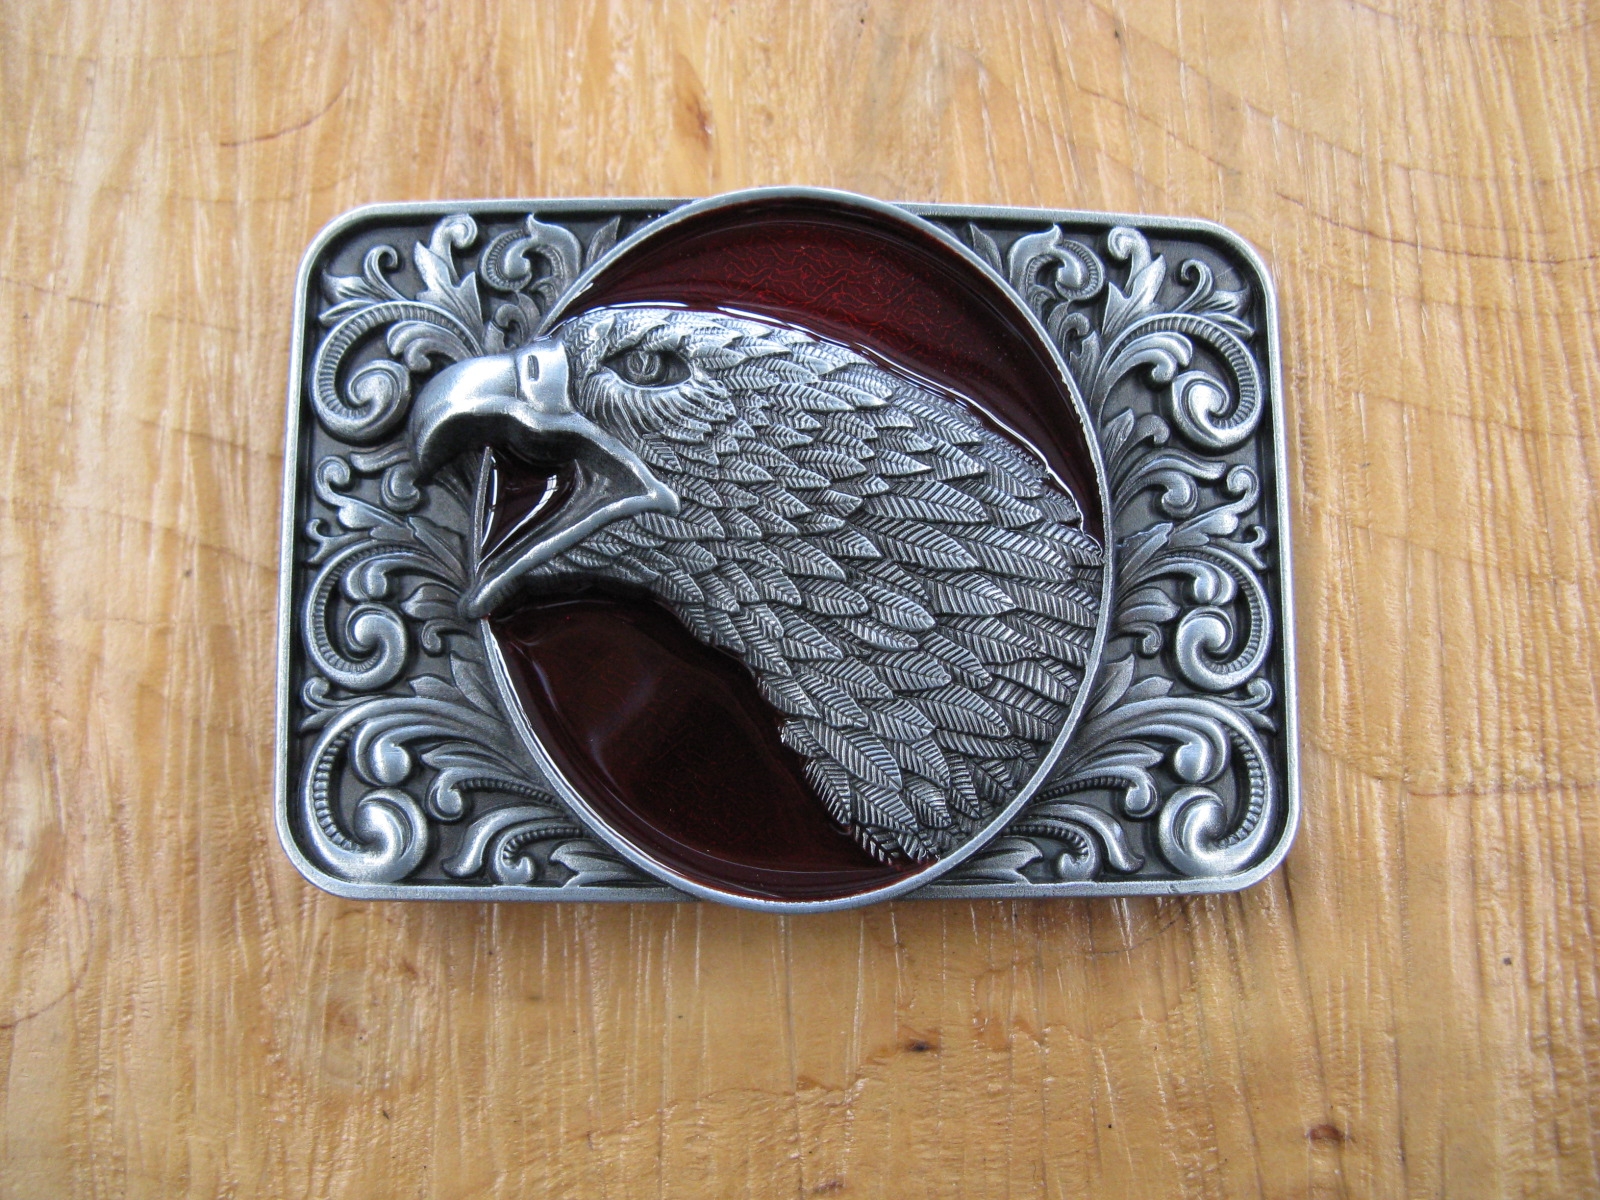 Oval Brass Eagle w/ Red Background Belt Buckle 3 1/4 Length f/s VGC